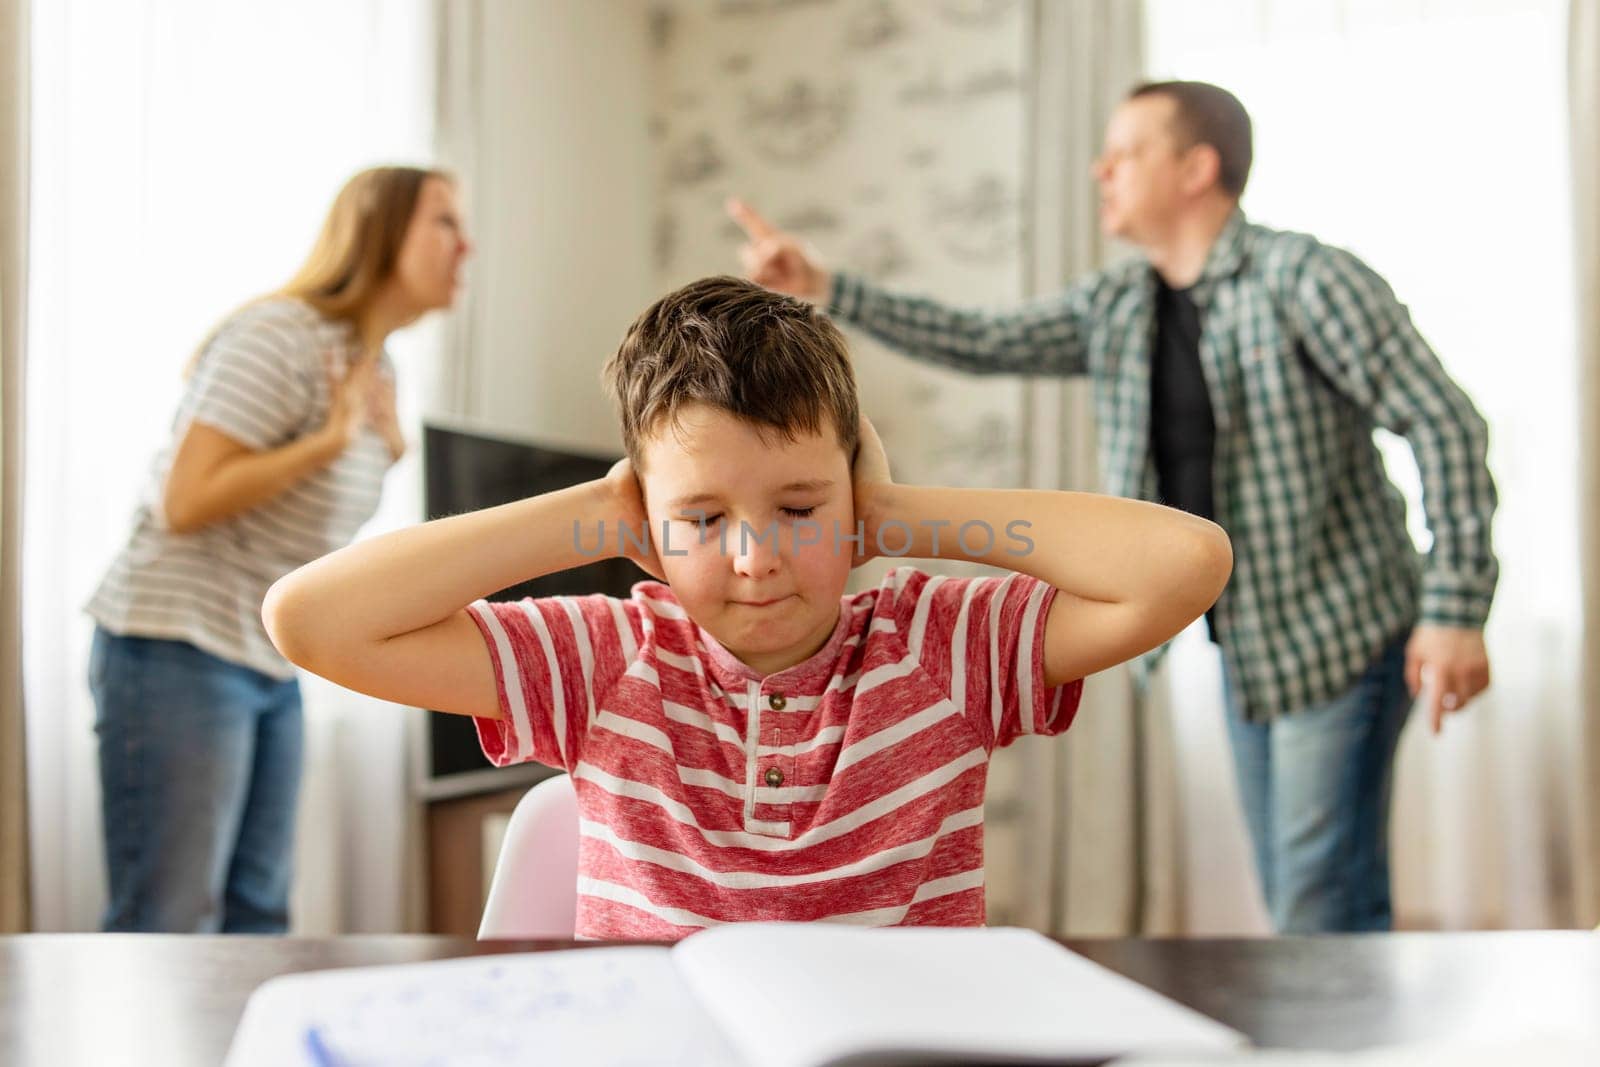 Sad child covers his ears with his hands during an argument between his parents by andreyz